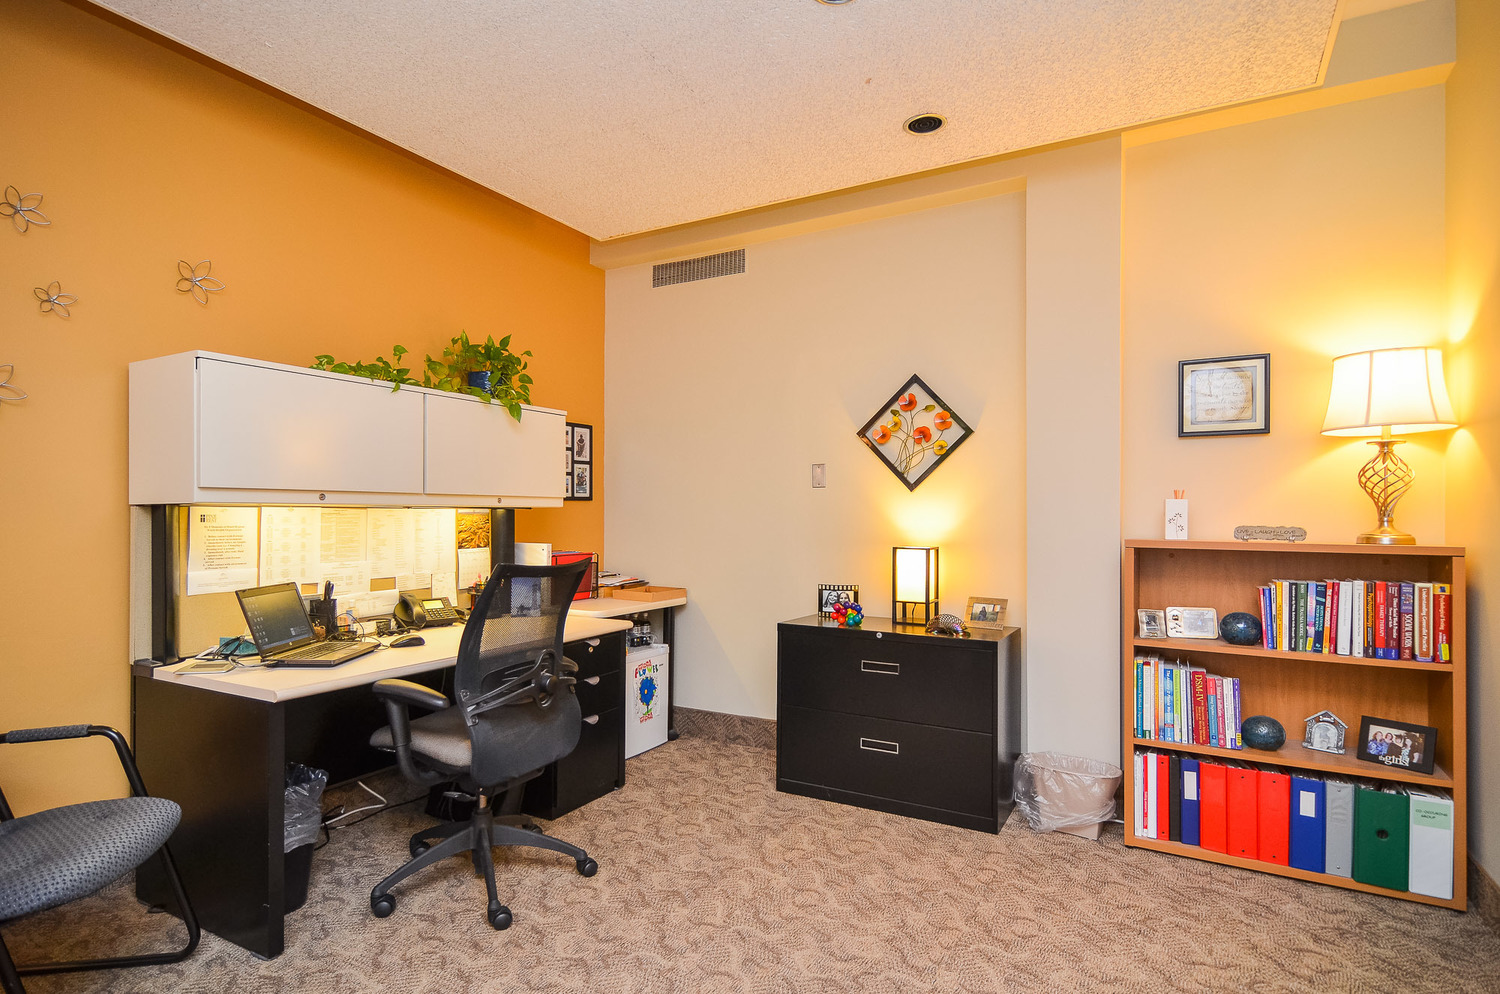 Gallery Photo of Private office for individual or family therapy